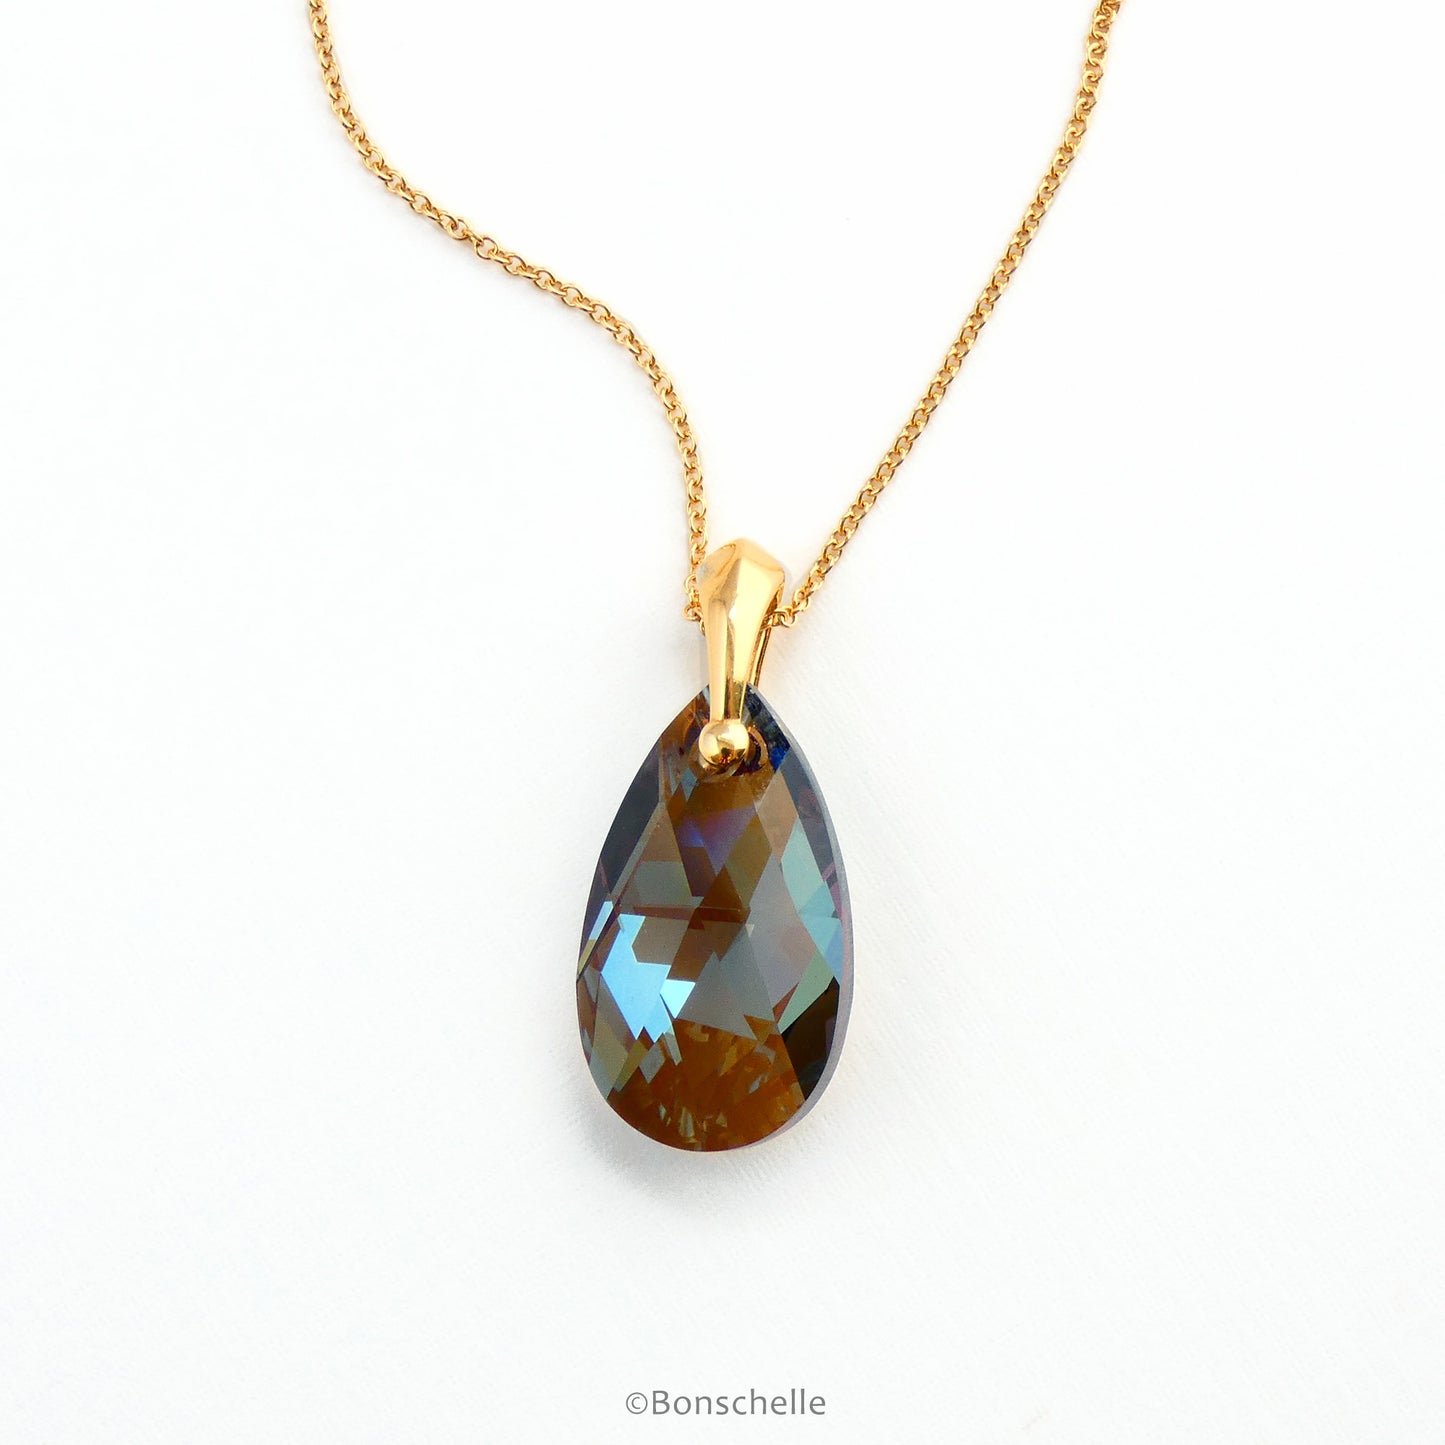 Handmade necklace with a bronze toned teardrop shape faceted crystal bead and 14K gold filled chain for women.